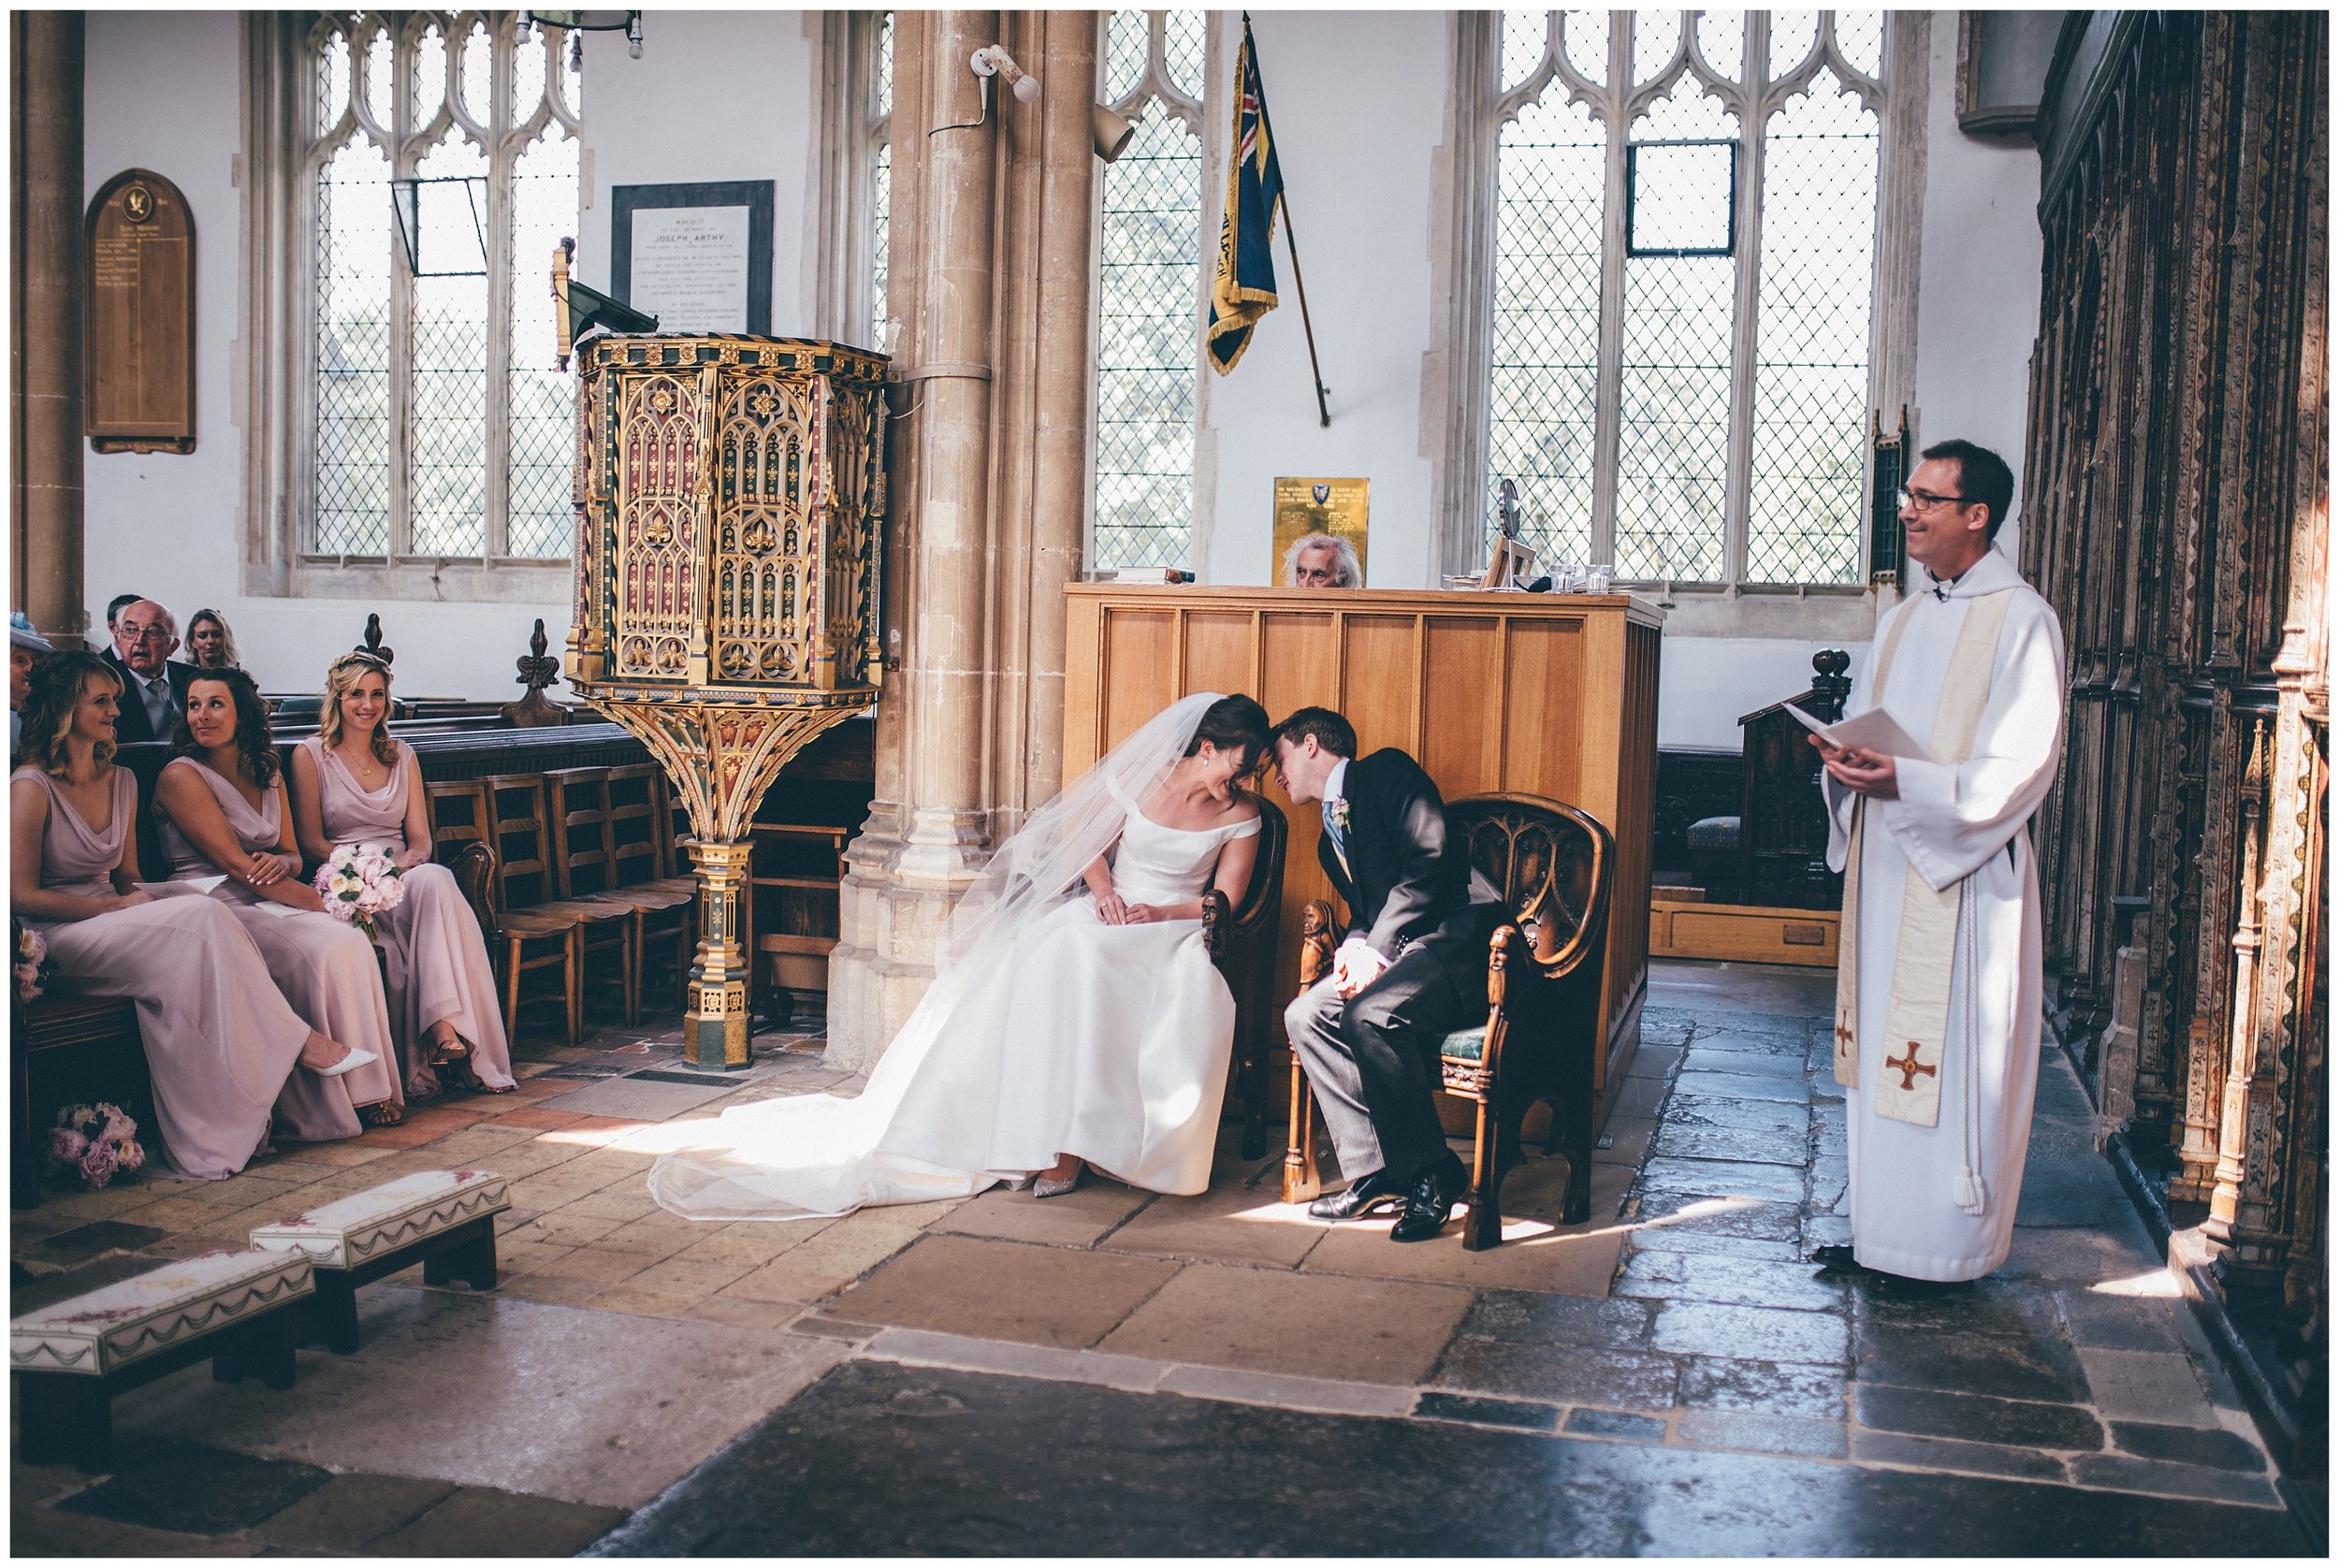 Wedding at St Edmunds Church in Southwold.